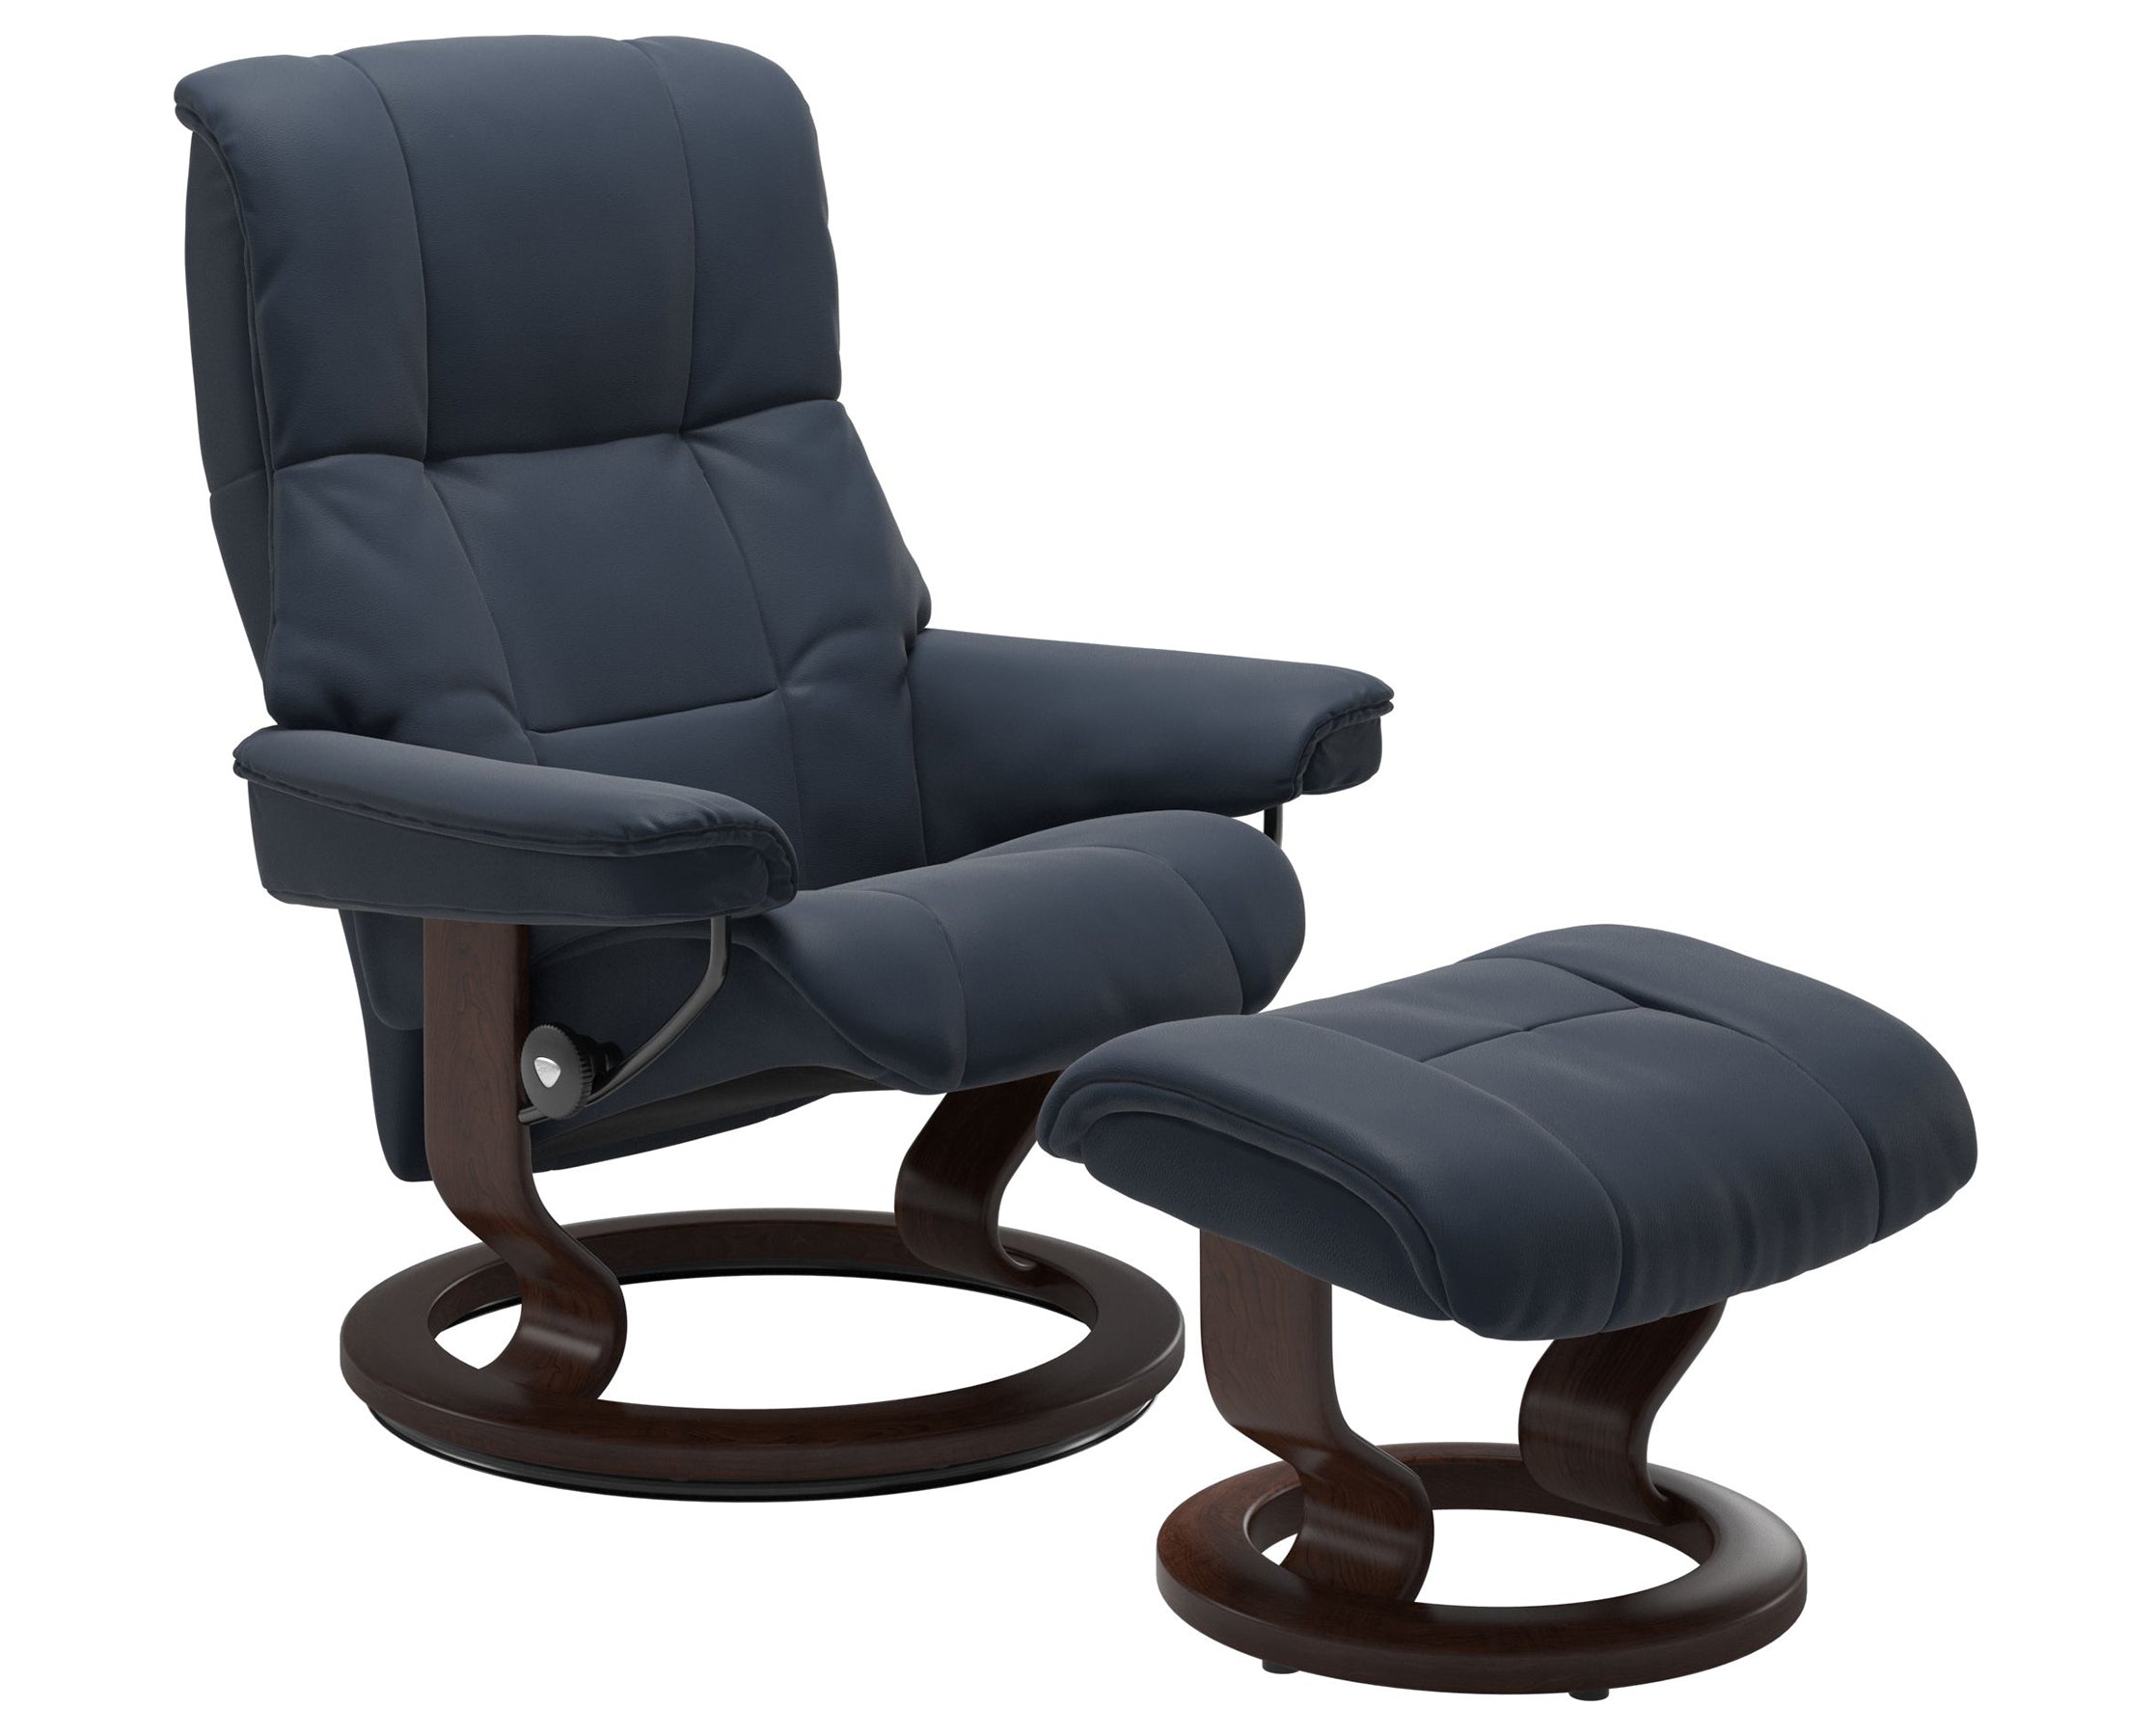 Paloma Leather Oxford Blue S/M/L and Brown Base | Stressless Mayfair Classic Recliner | Valley Ridge Furniture